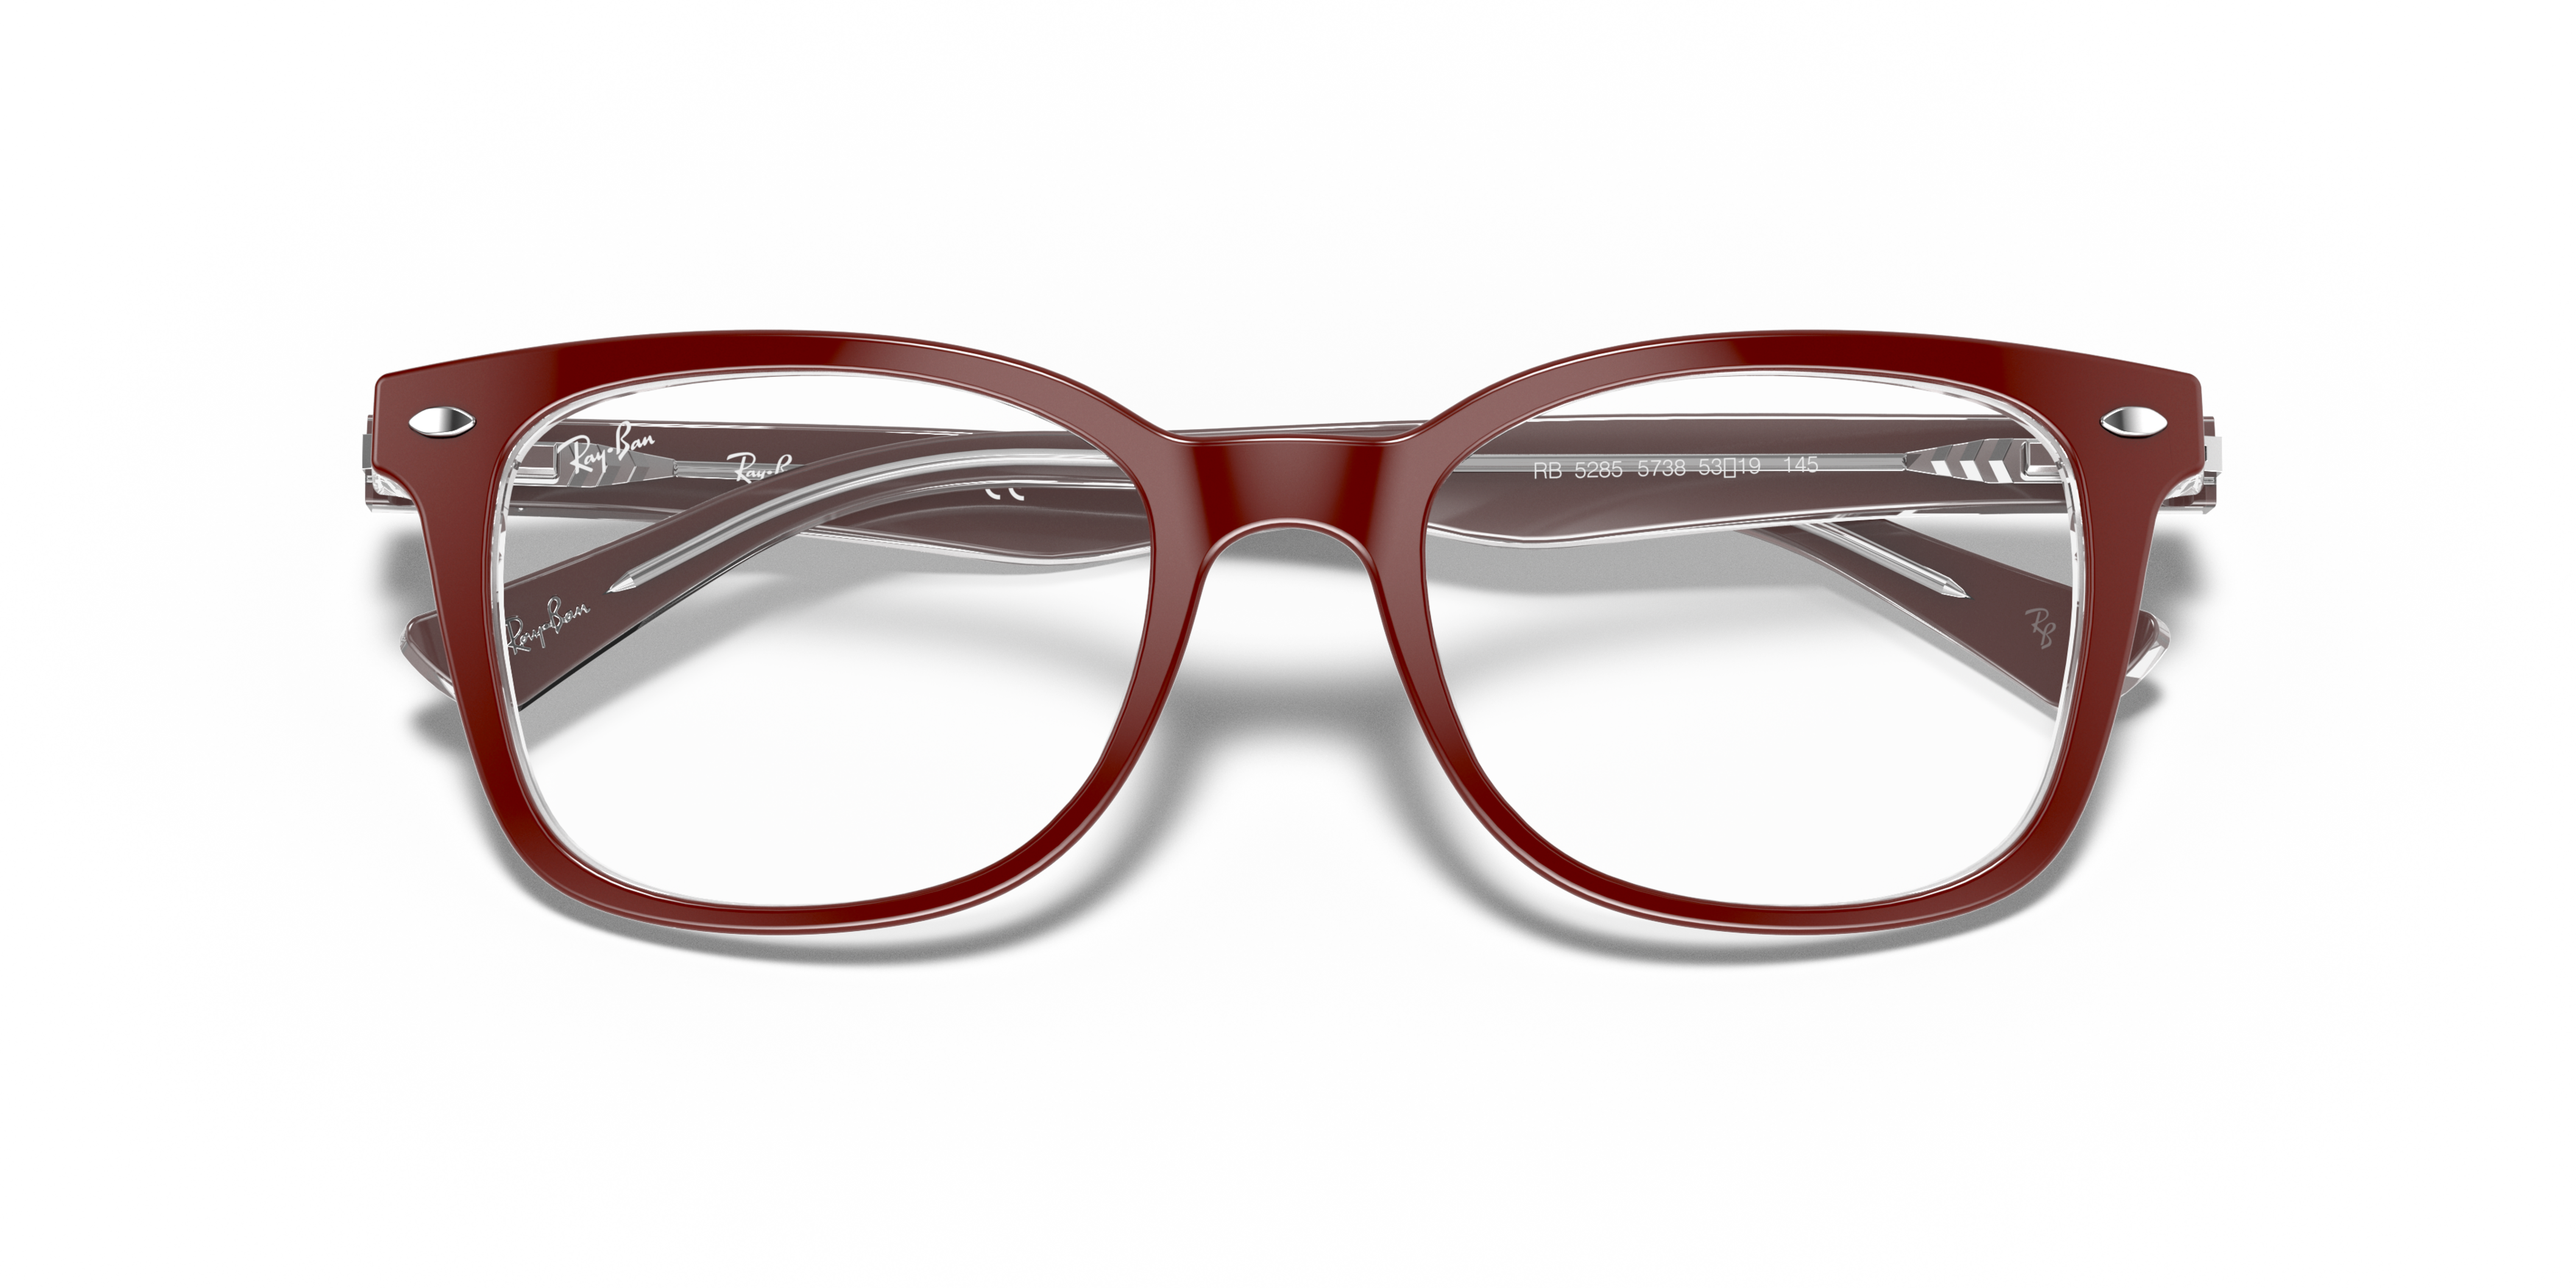 Folded Ray-Ban RX 5285 Glasses Transparent / Red